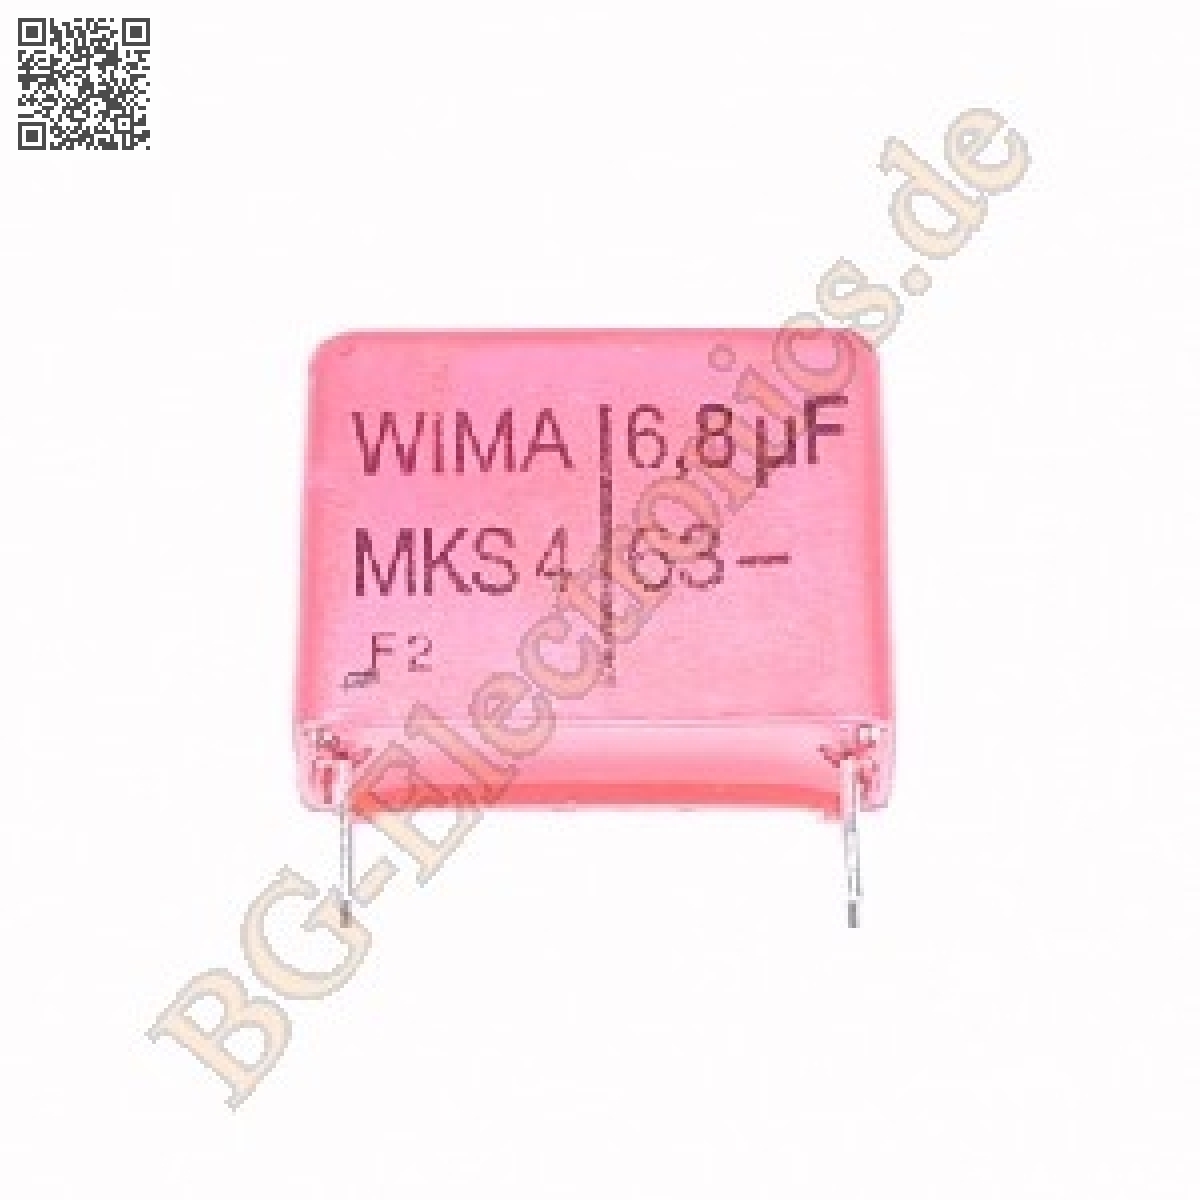 FO-R 6.8F / 63V / MKS4 / RM22,5